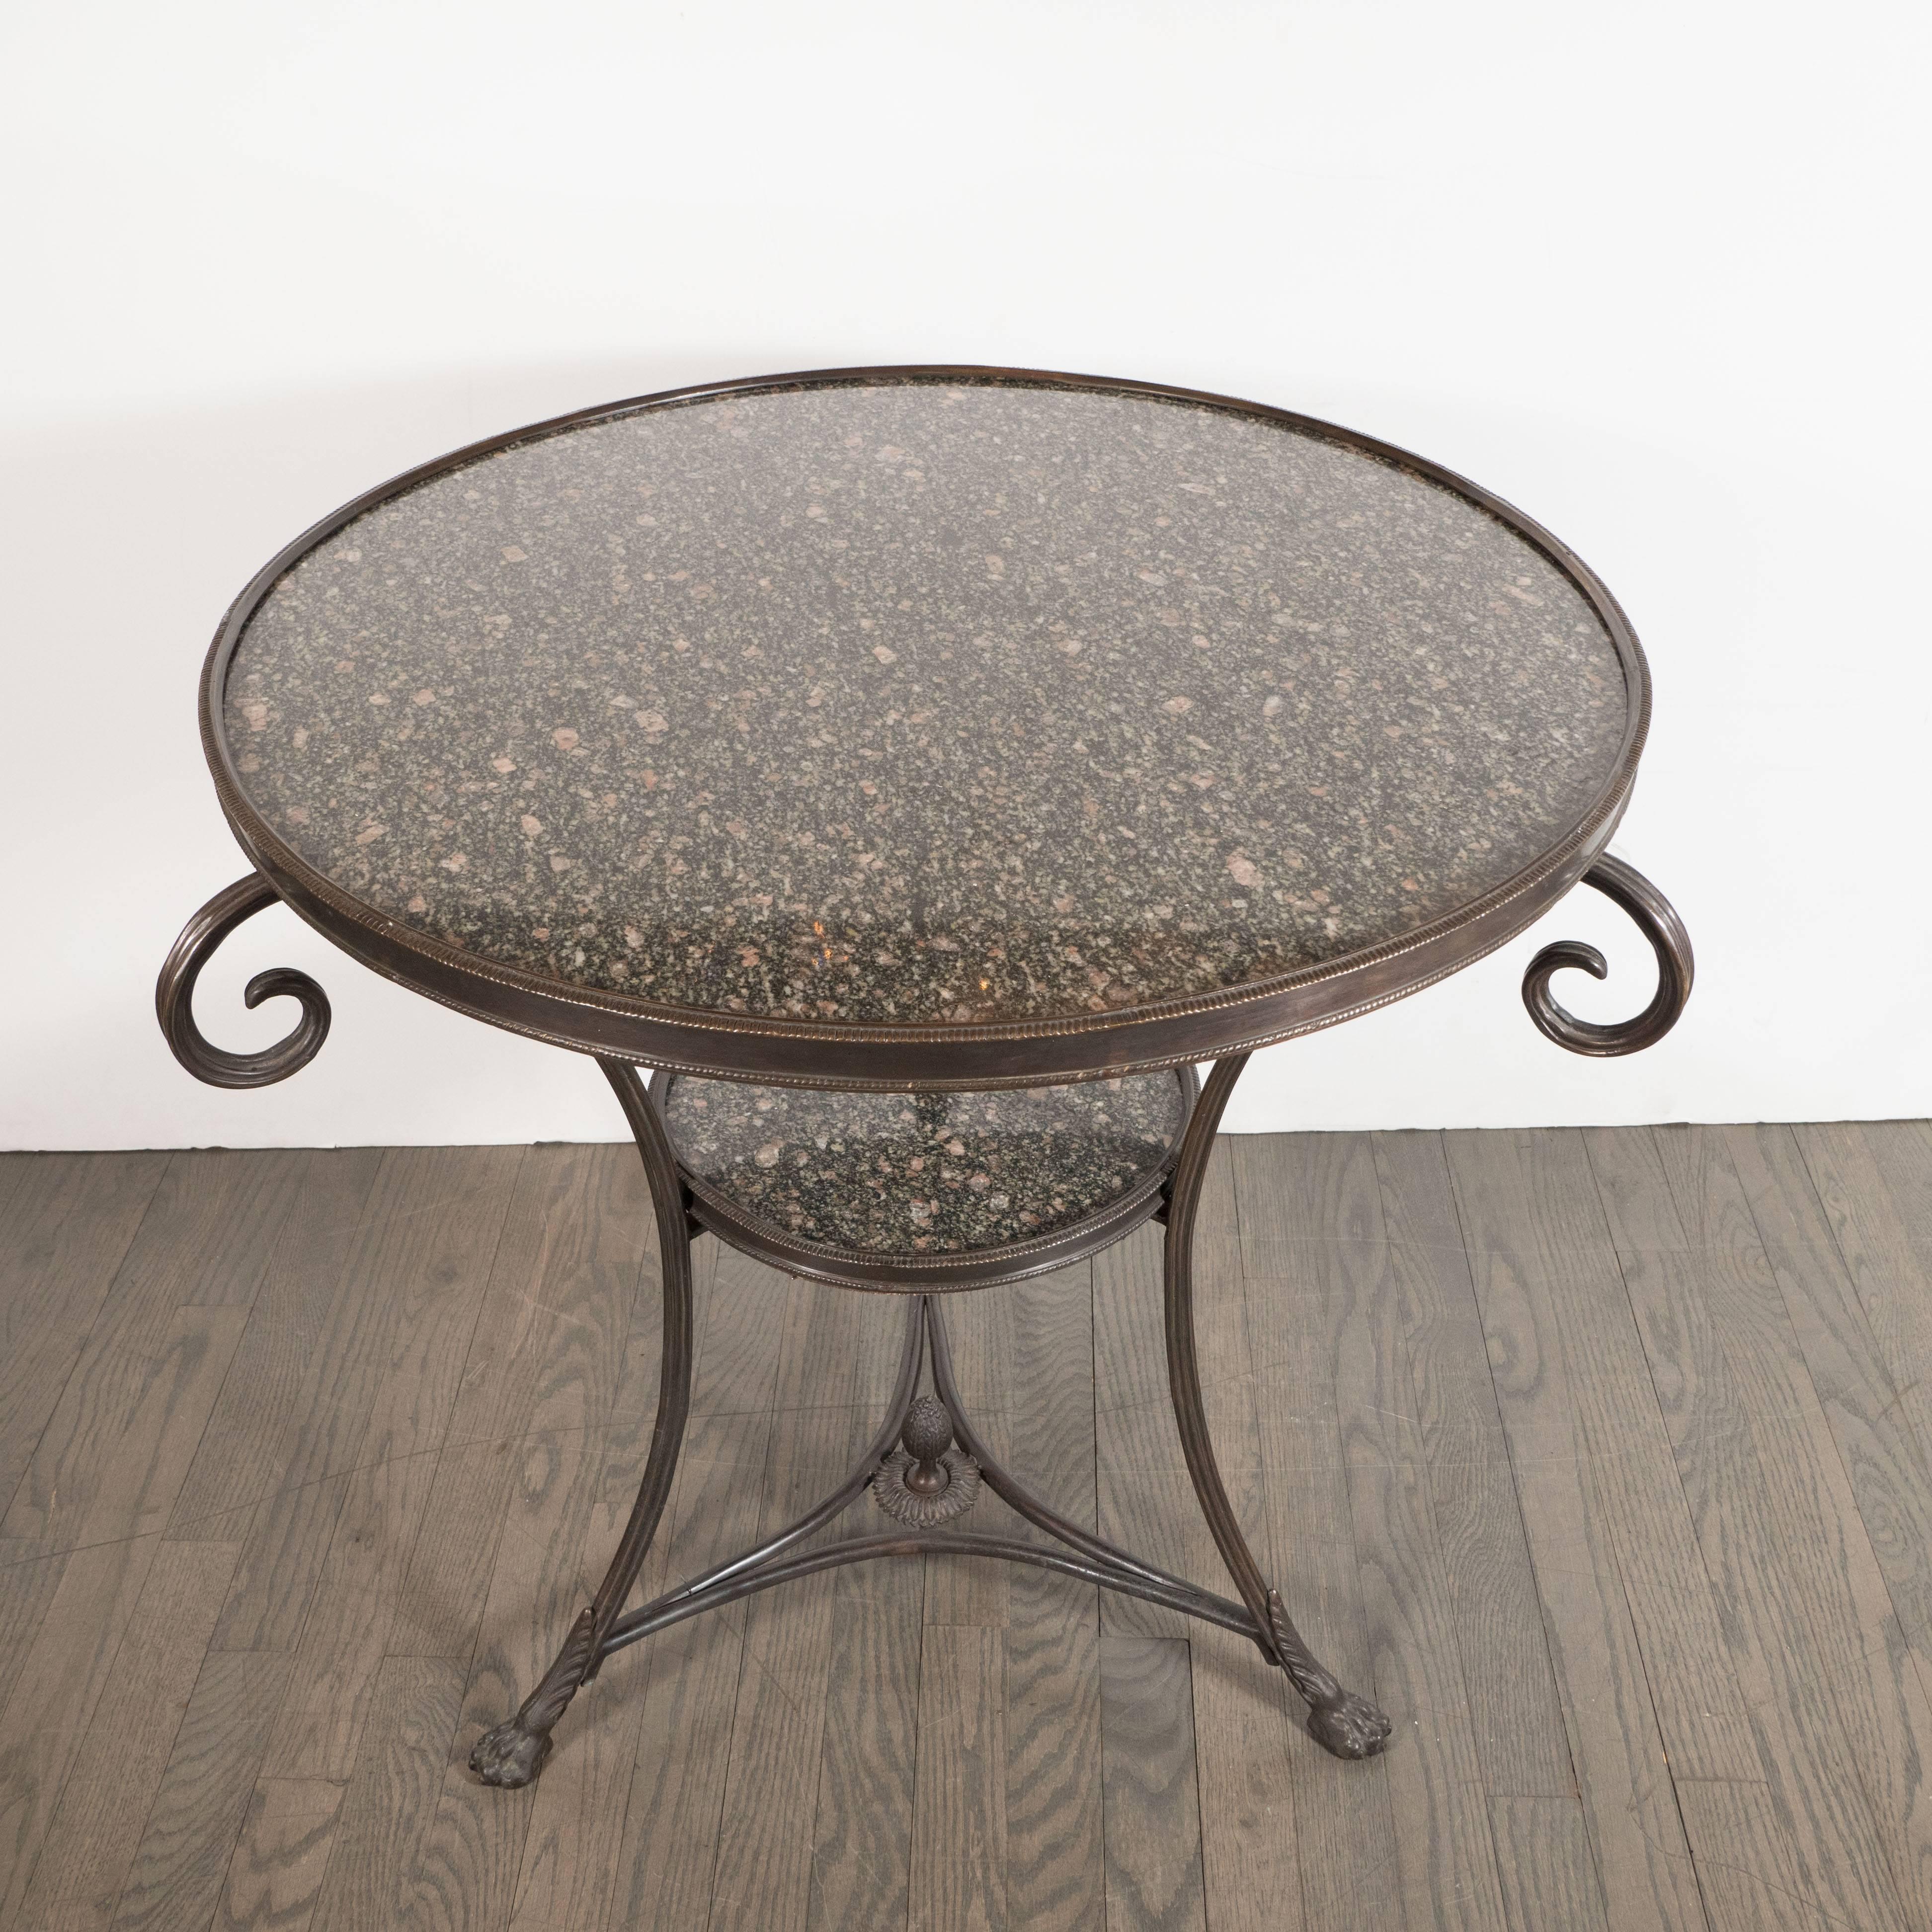 Mid-20th Century Pair of French Art Deco Directoire Style Bronze and Granite Gueridon Tables